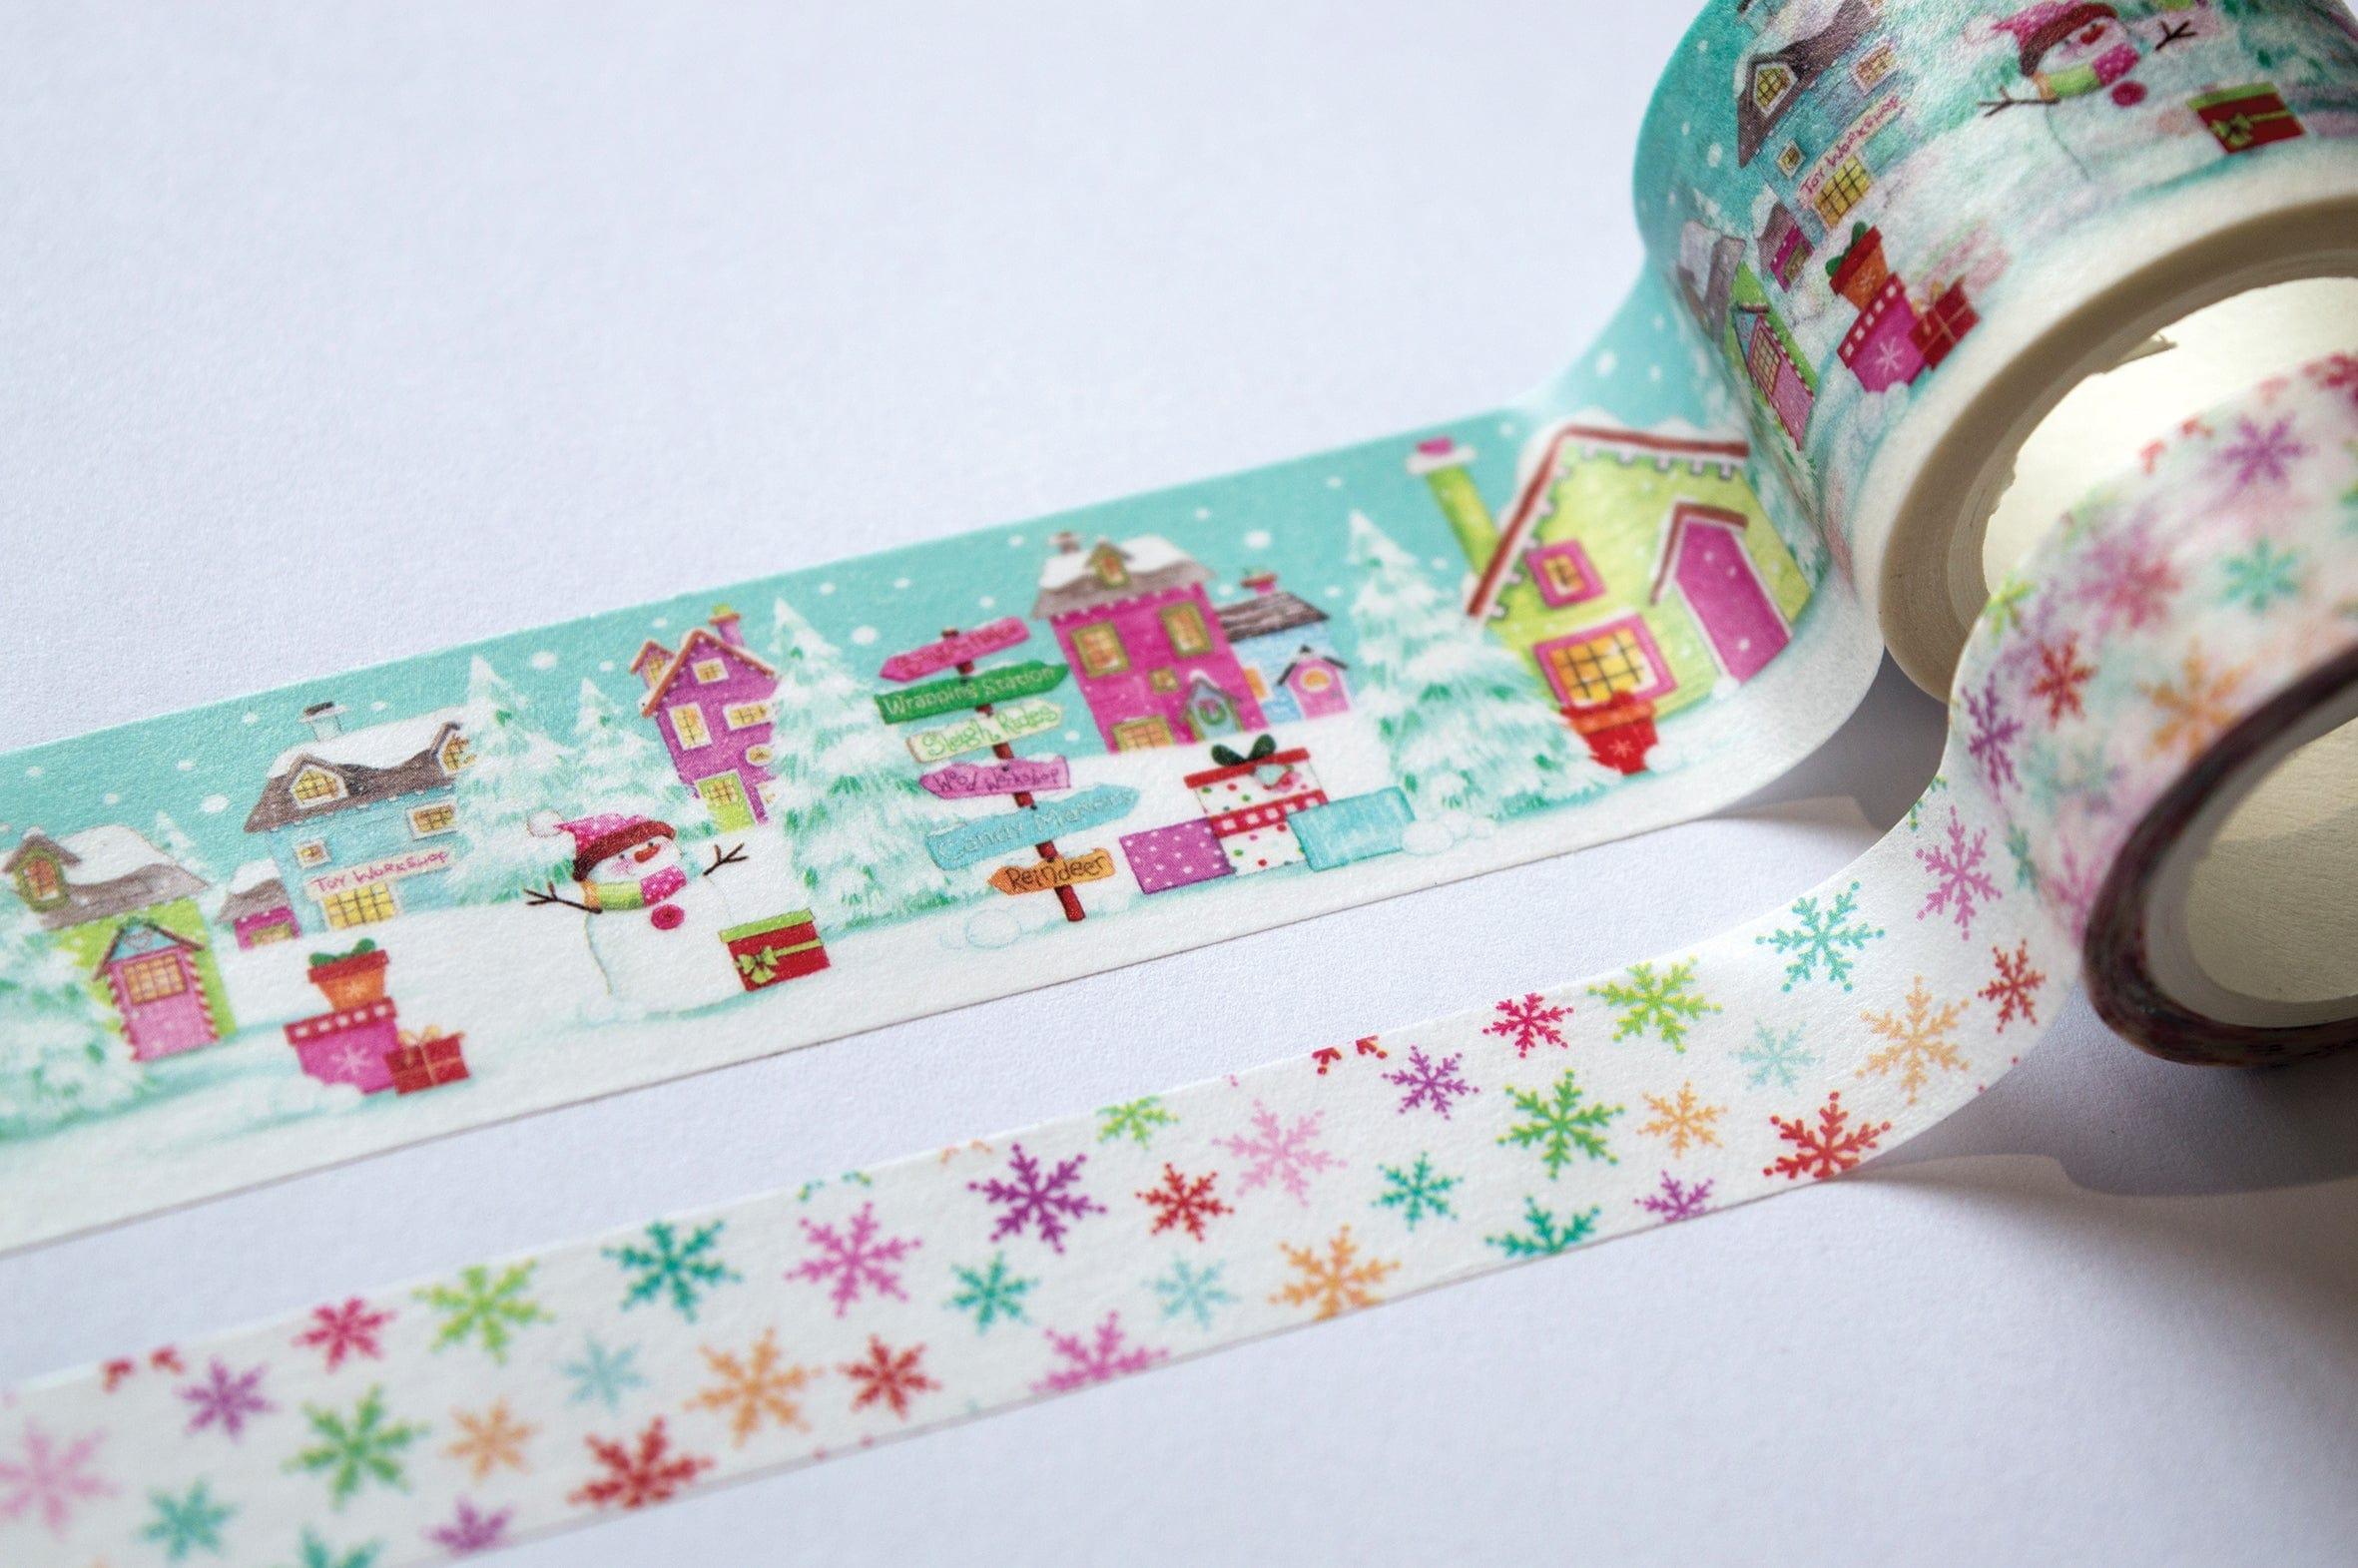 Made By Elves Collection Washi Tape by Craft Consortium - 10 Meters - Scrapbook Supply Companies